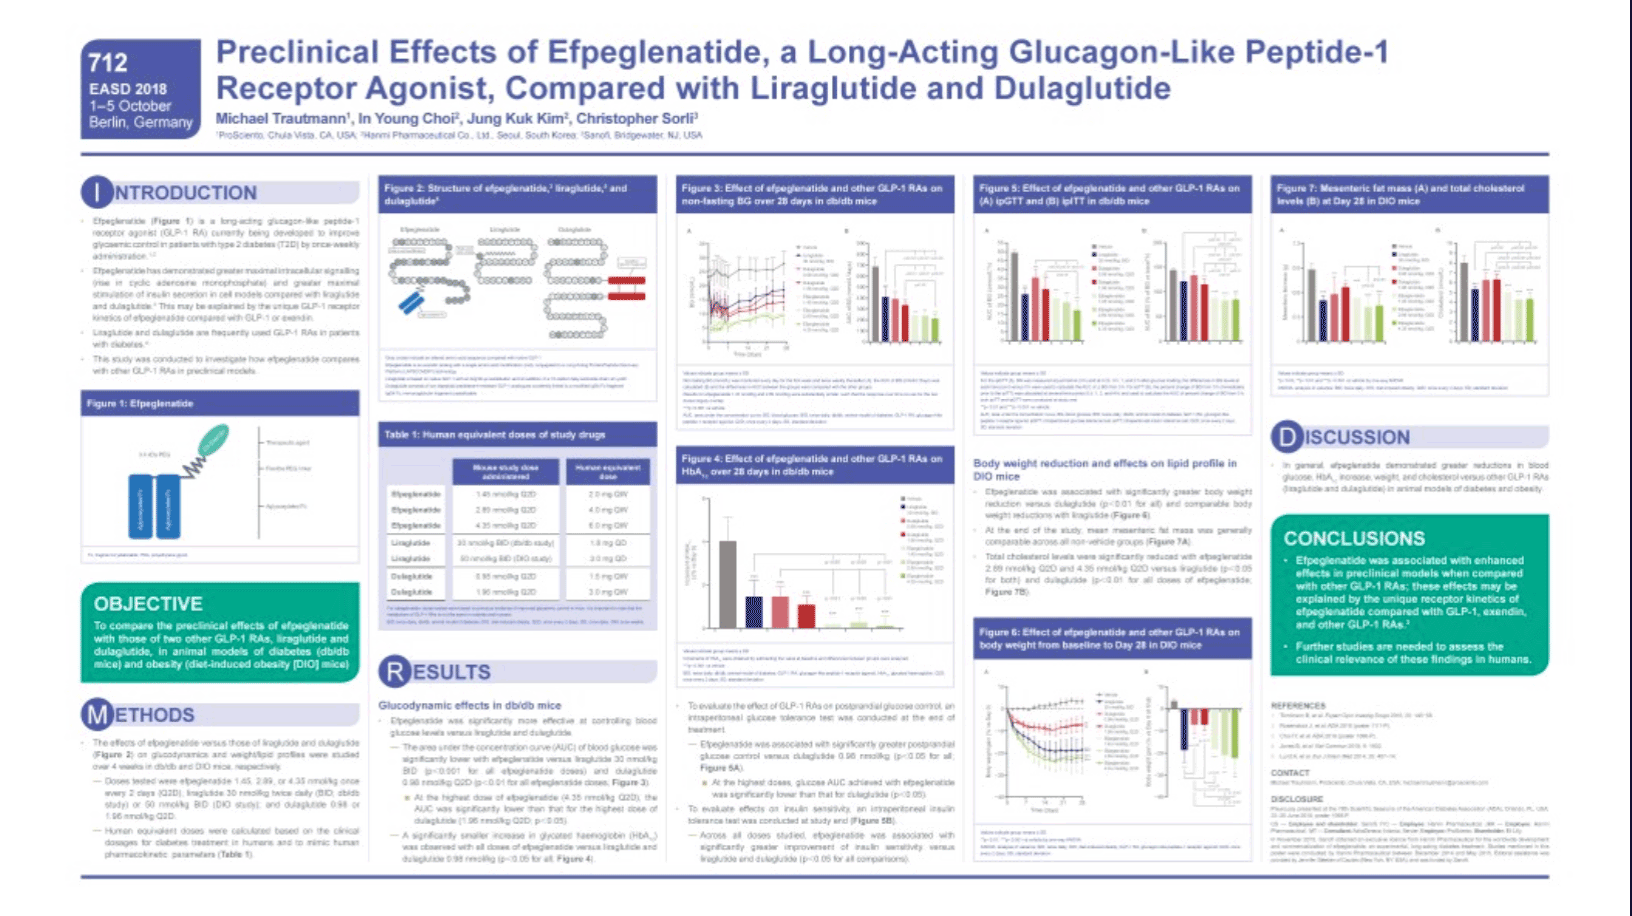 image of Preclinical Effects of Efpeglenatide, a Long-Acting Glucagon-Like Peptide-1 Receptor Agonist, Compared with Liraglutide and Dulaglutide